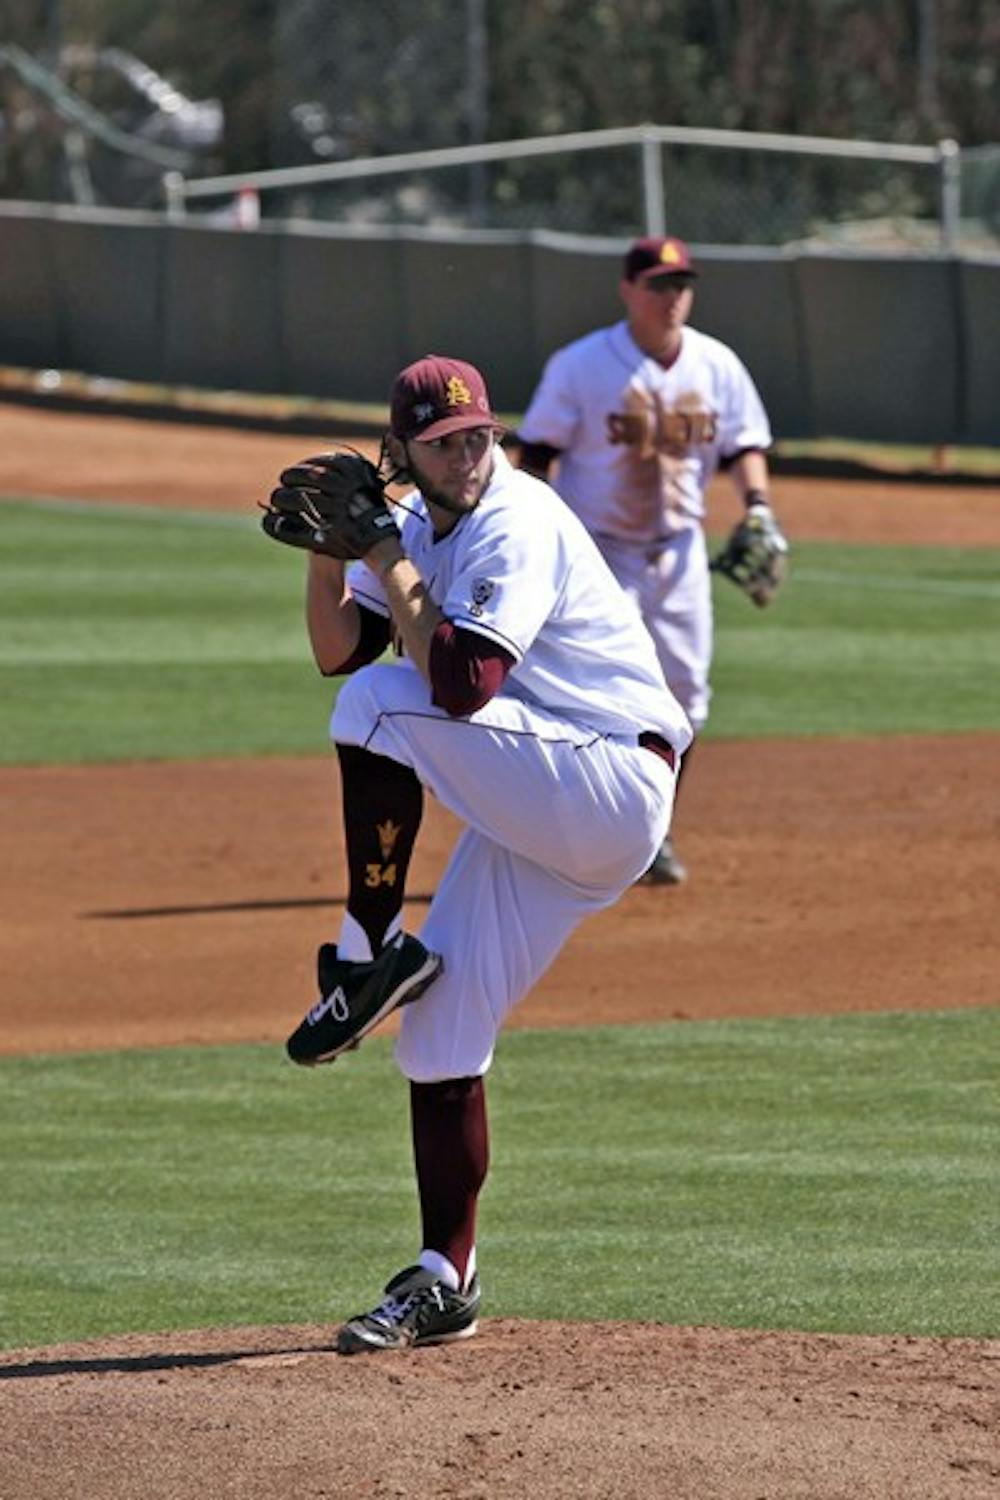 Trevor Williams throws a pitch in a game against UC Riverside on Feb. 26. Williams has the third lowest ERA in the Pac-12 at 1.11.  (Photo by Sam Rosenbaum)